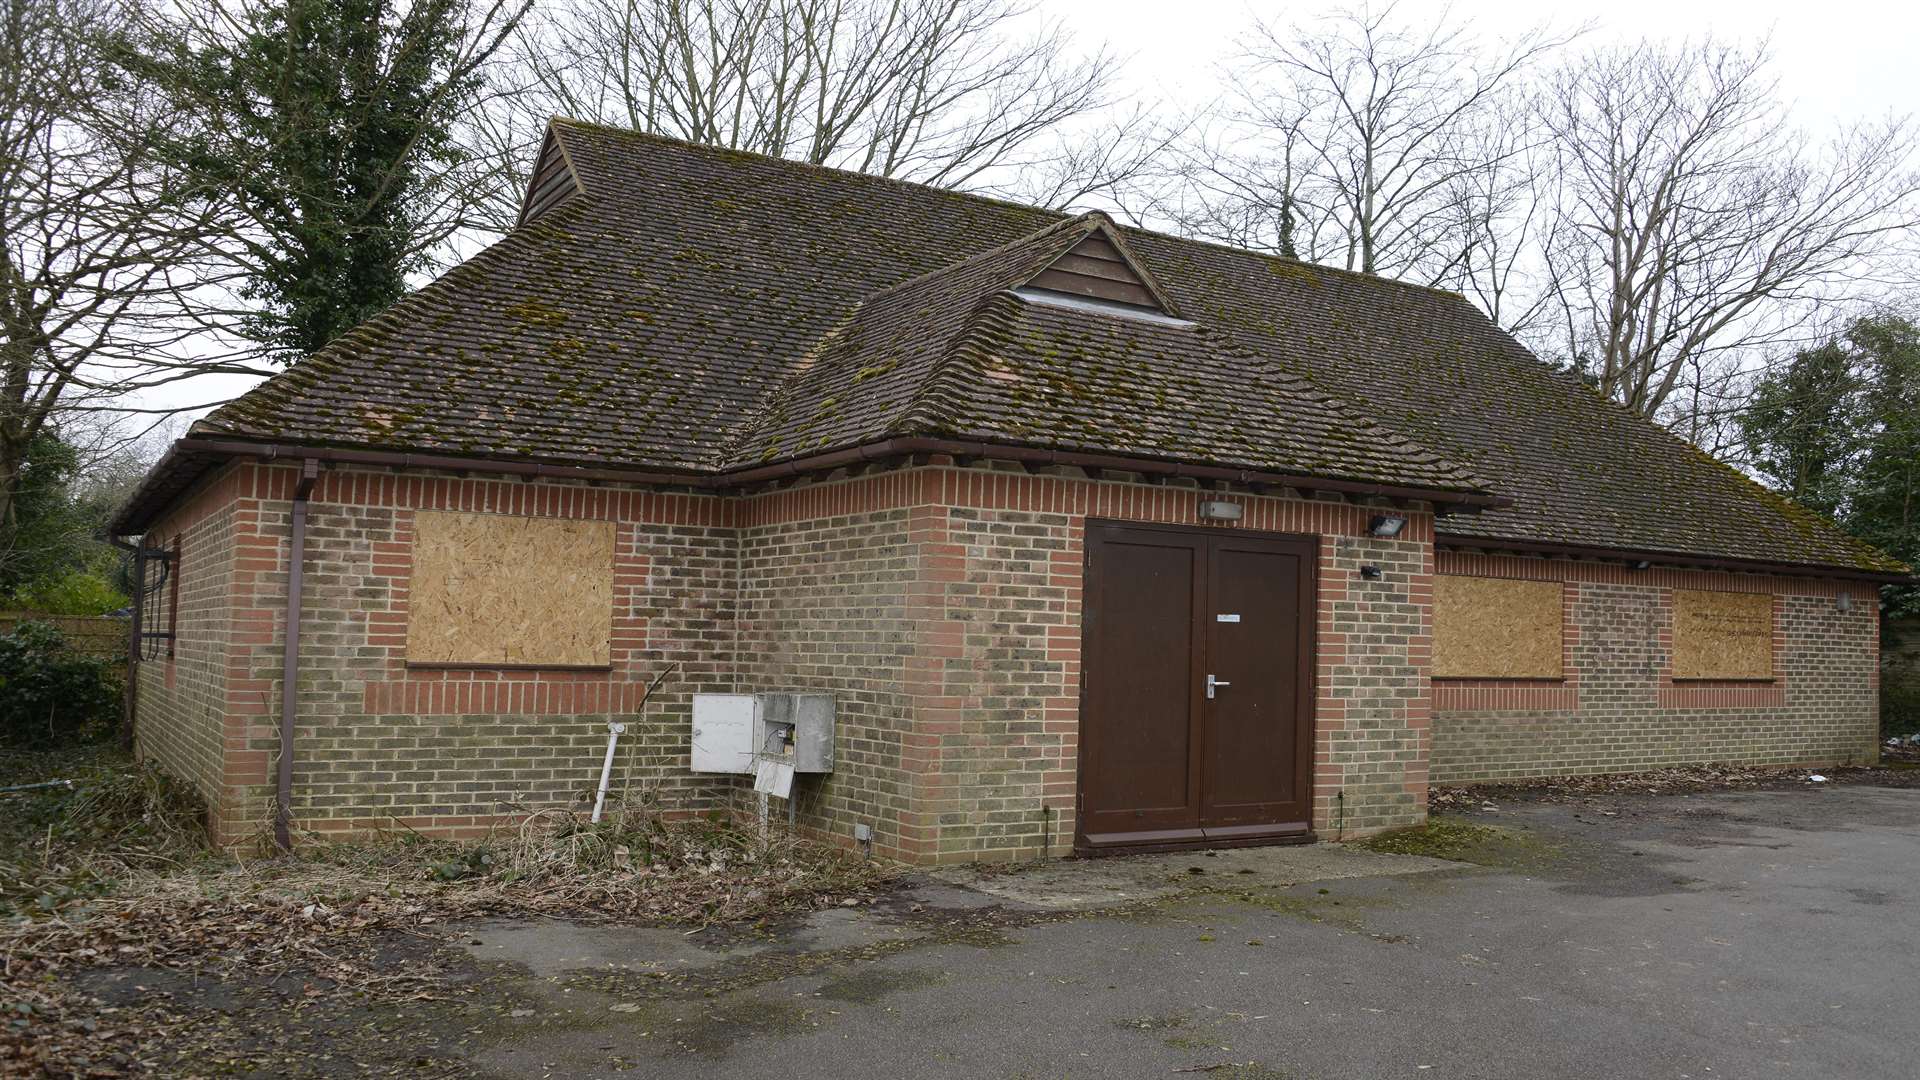 The old St John Ambulance hall in Danemore, Tenterden, which is being offered for community use at a peppercorn rent.